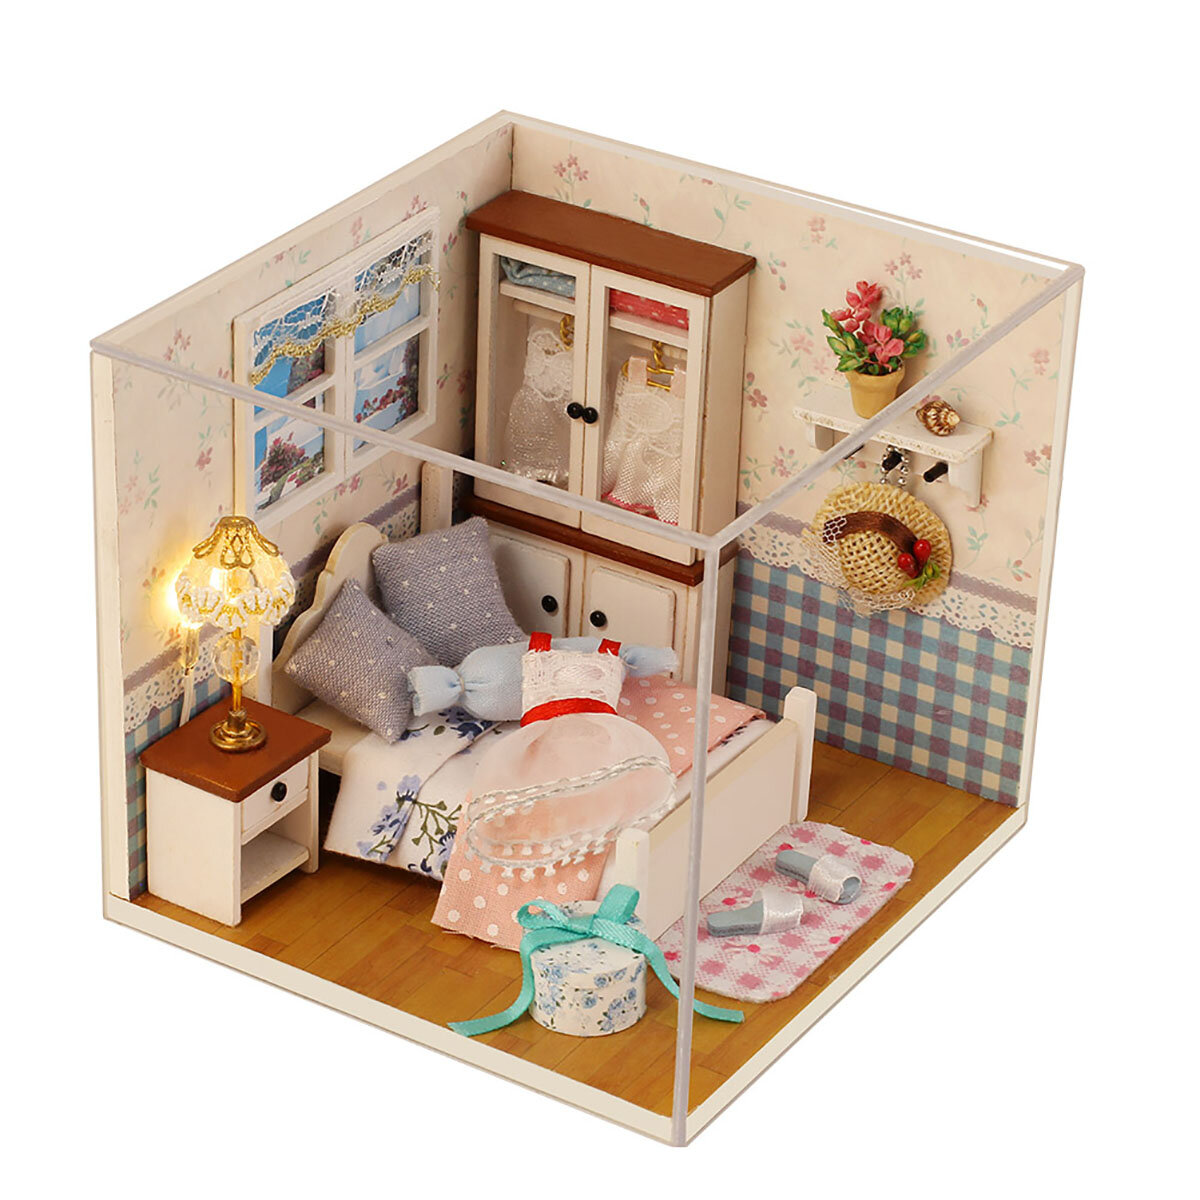 Handmade DIY Dollhouse With Tool Set 3D Scale Miniature LED Lights Kids Room For Children Gift Home Decoration